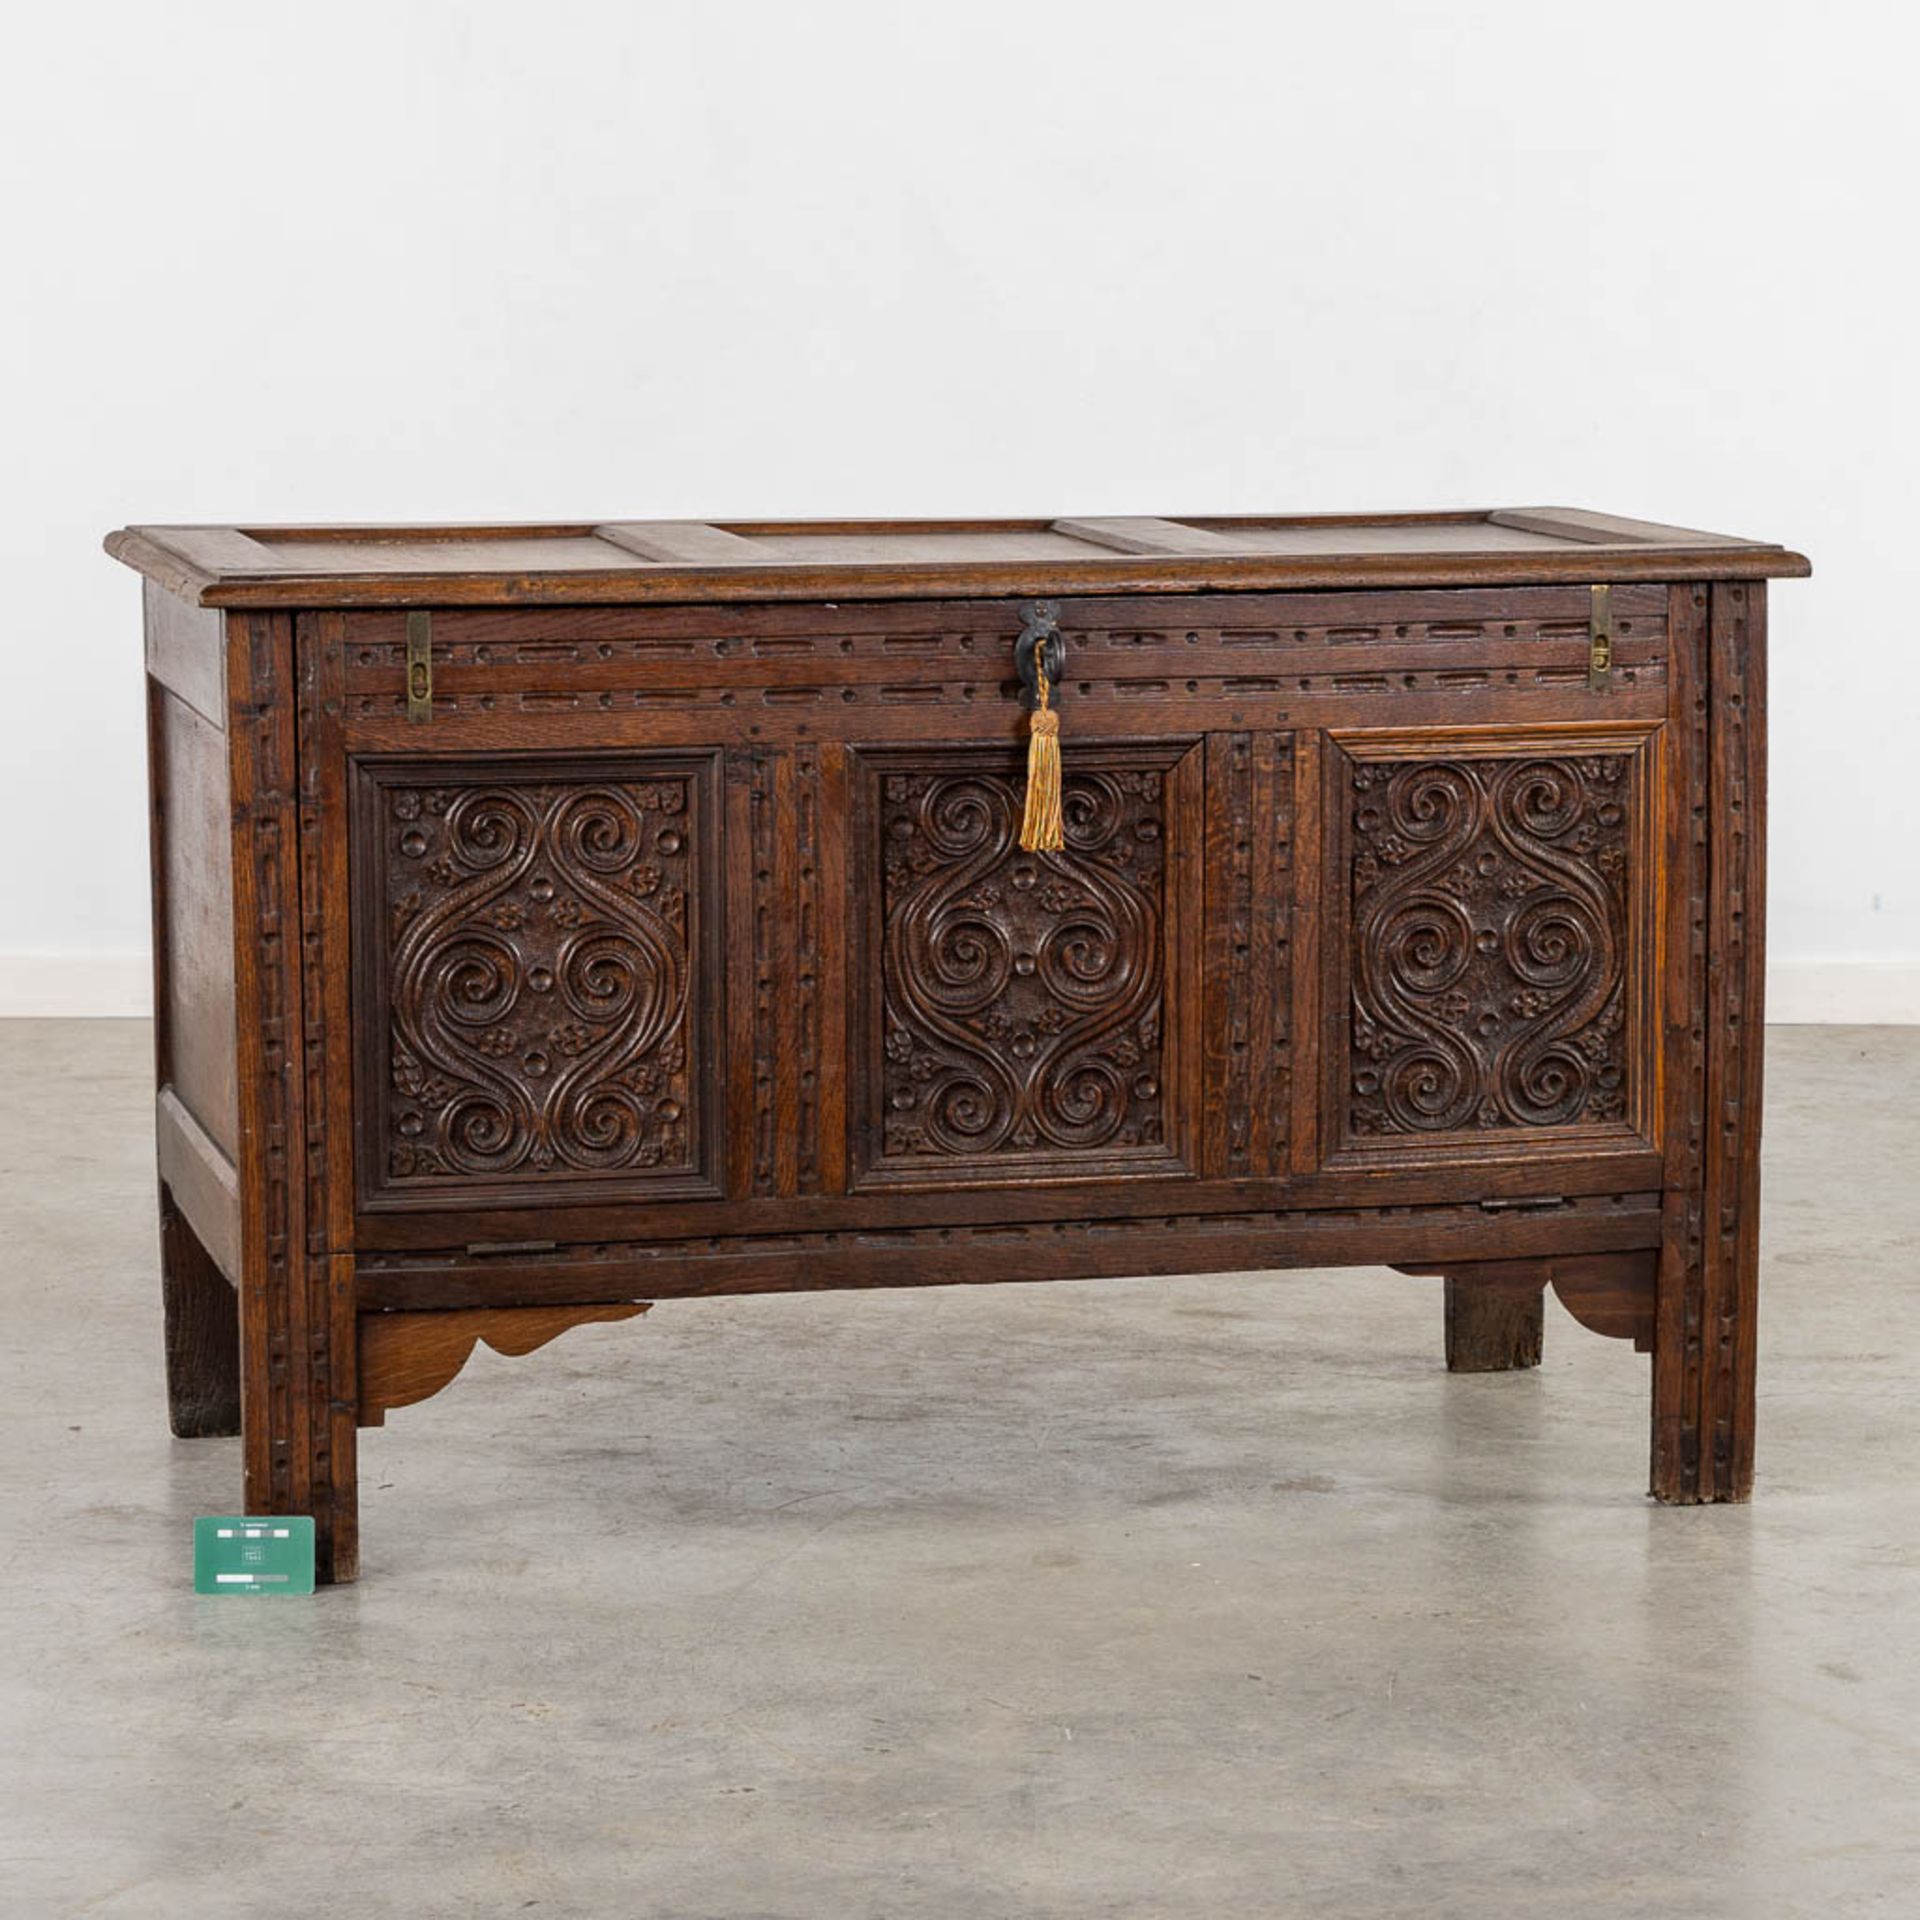 A chest with wood-sculptured panels. 19th C. (L:56 x W:120 x H:72 cm) - Image 2 of 11